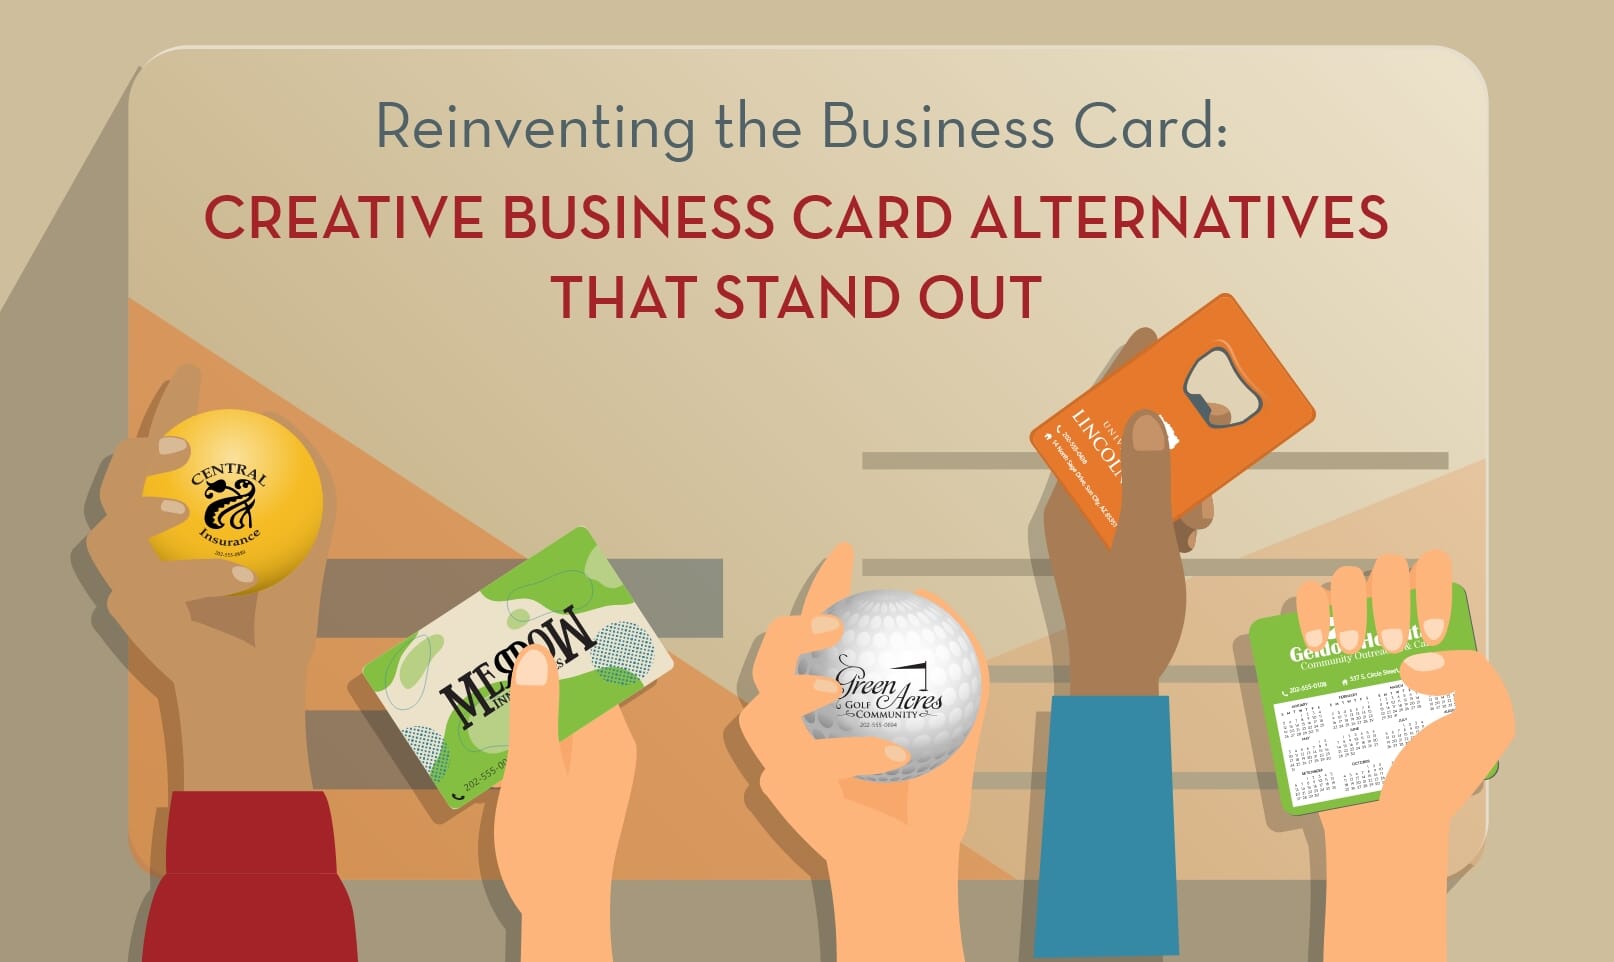 Creative Business Card Alternatives that Stand Out